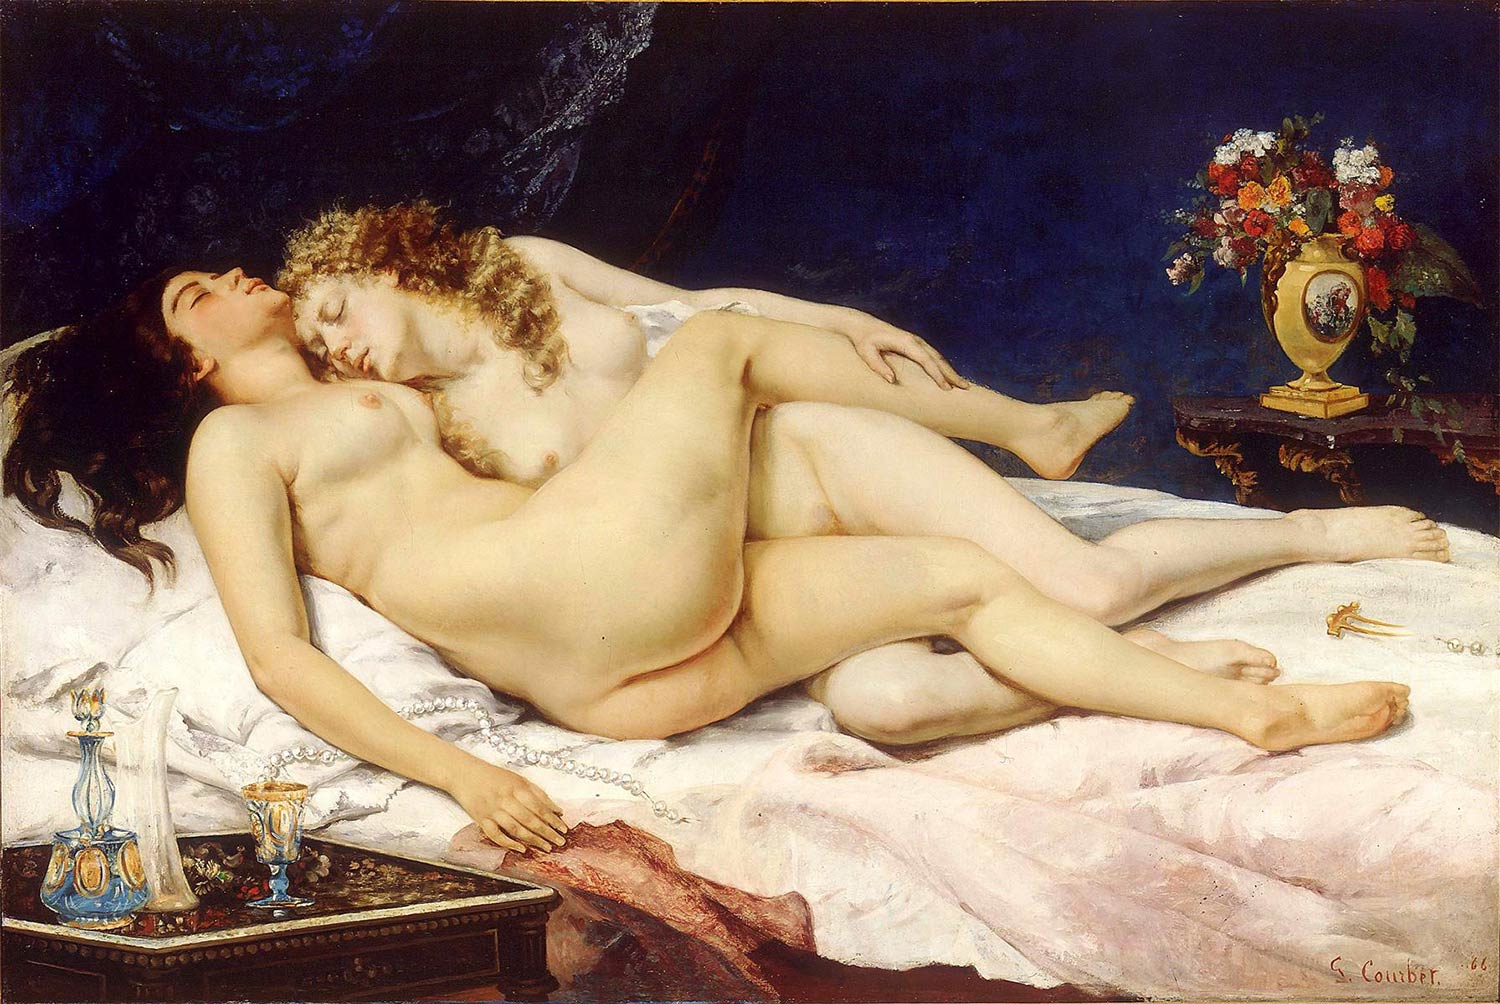 Le Sommeil (The Sleepers), Gustave Courbet (1866)